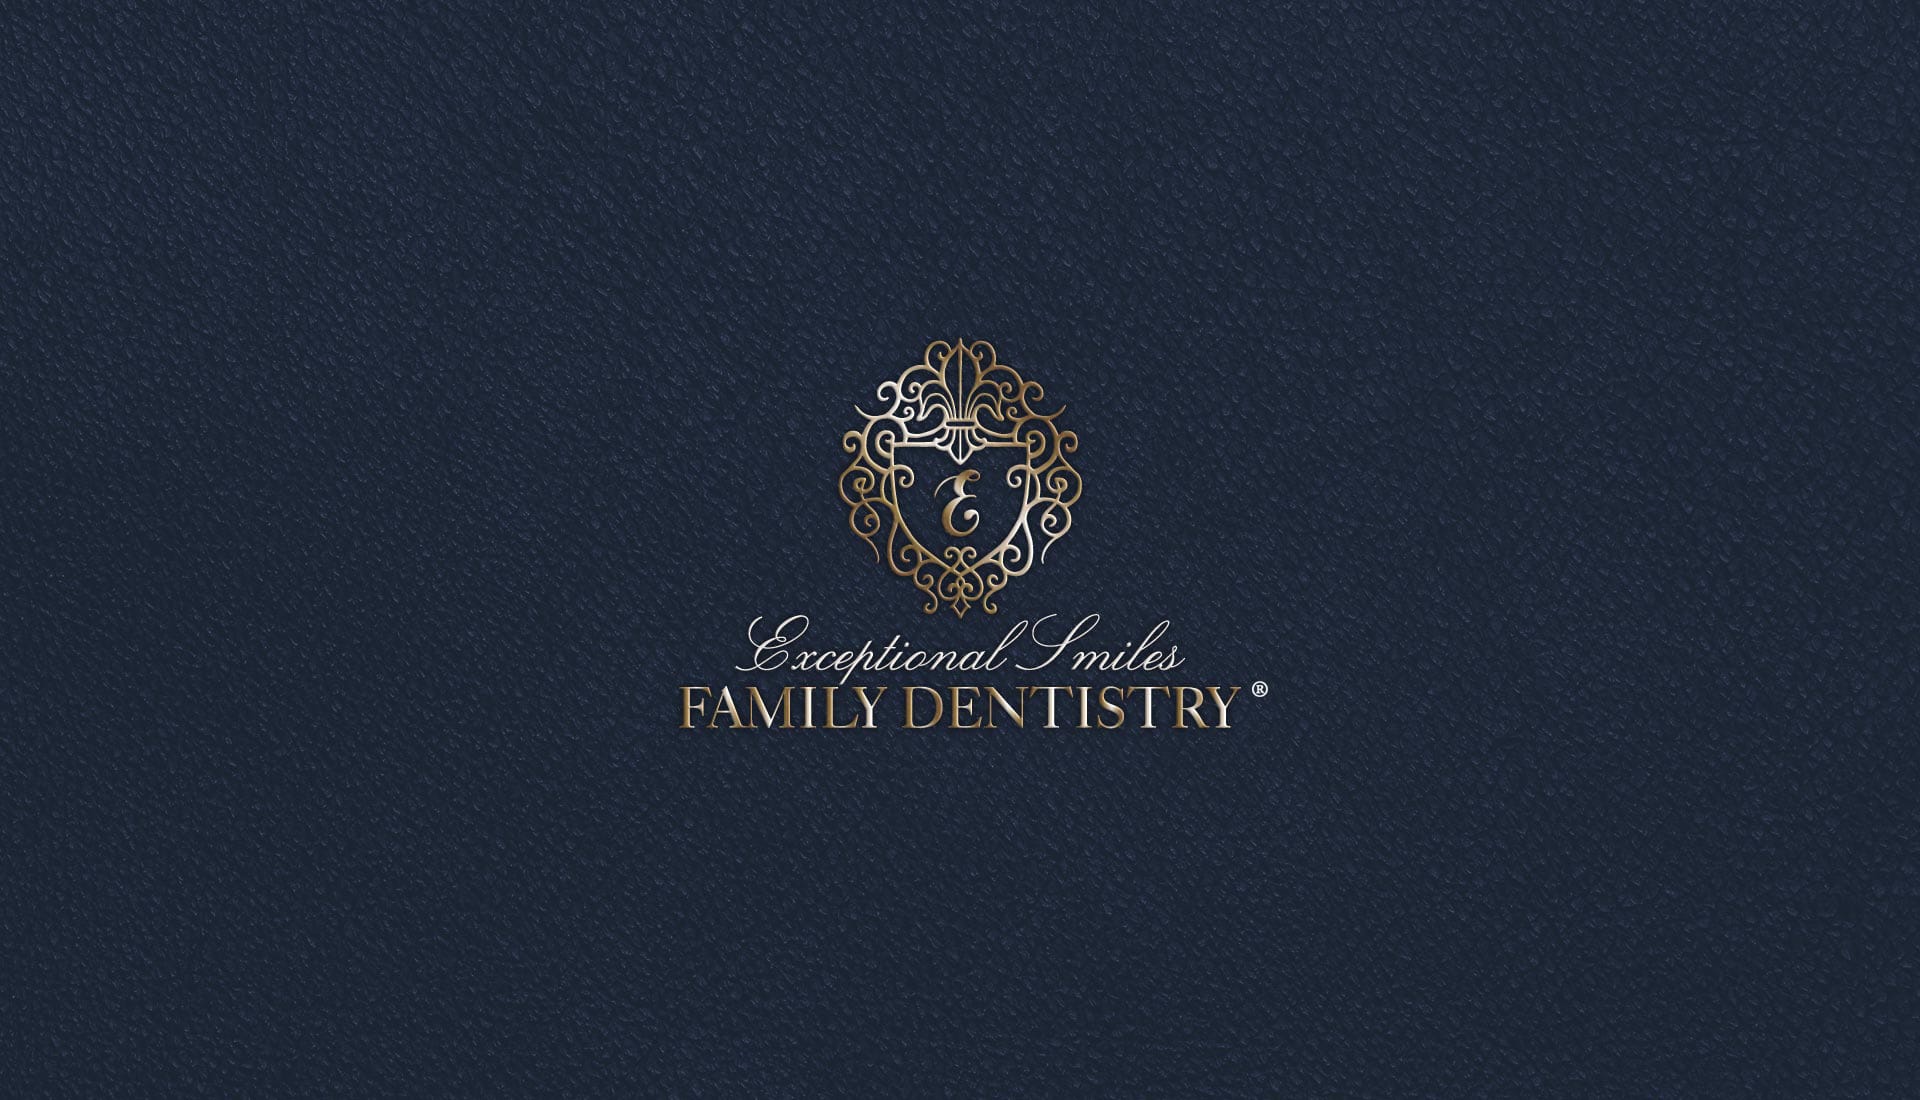 Exceptional Smiles Family Dentistry Logo